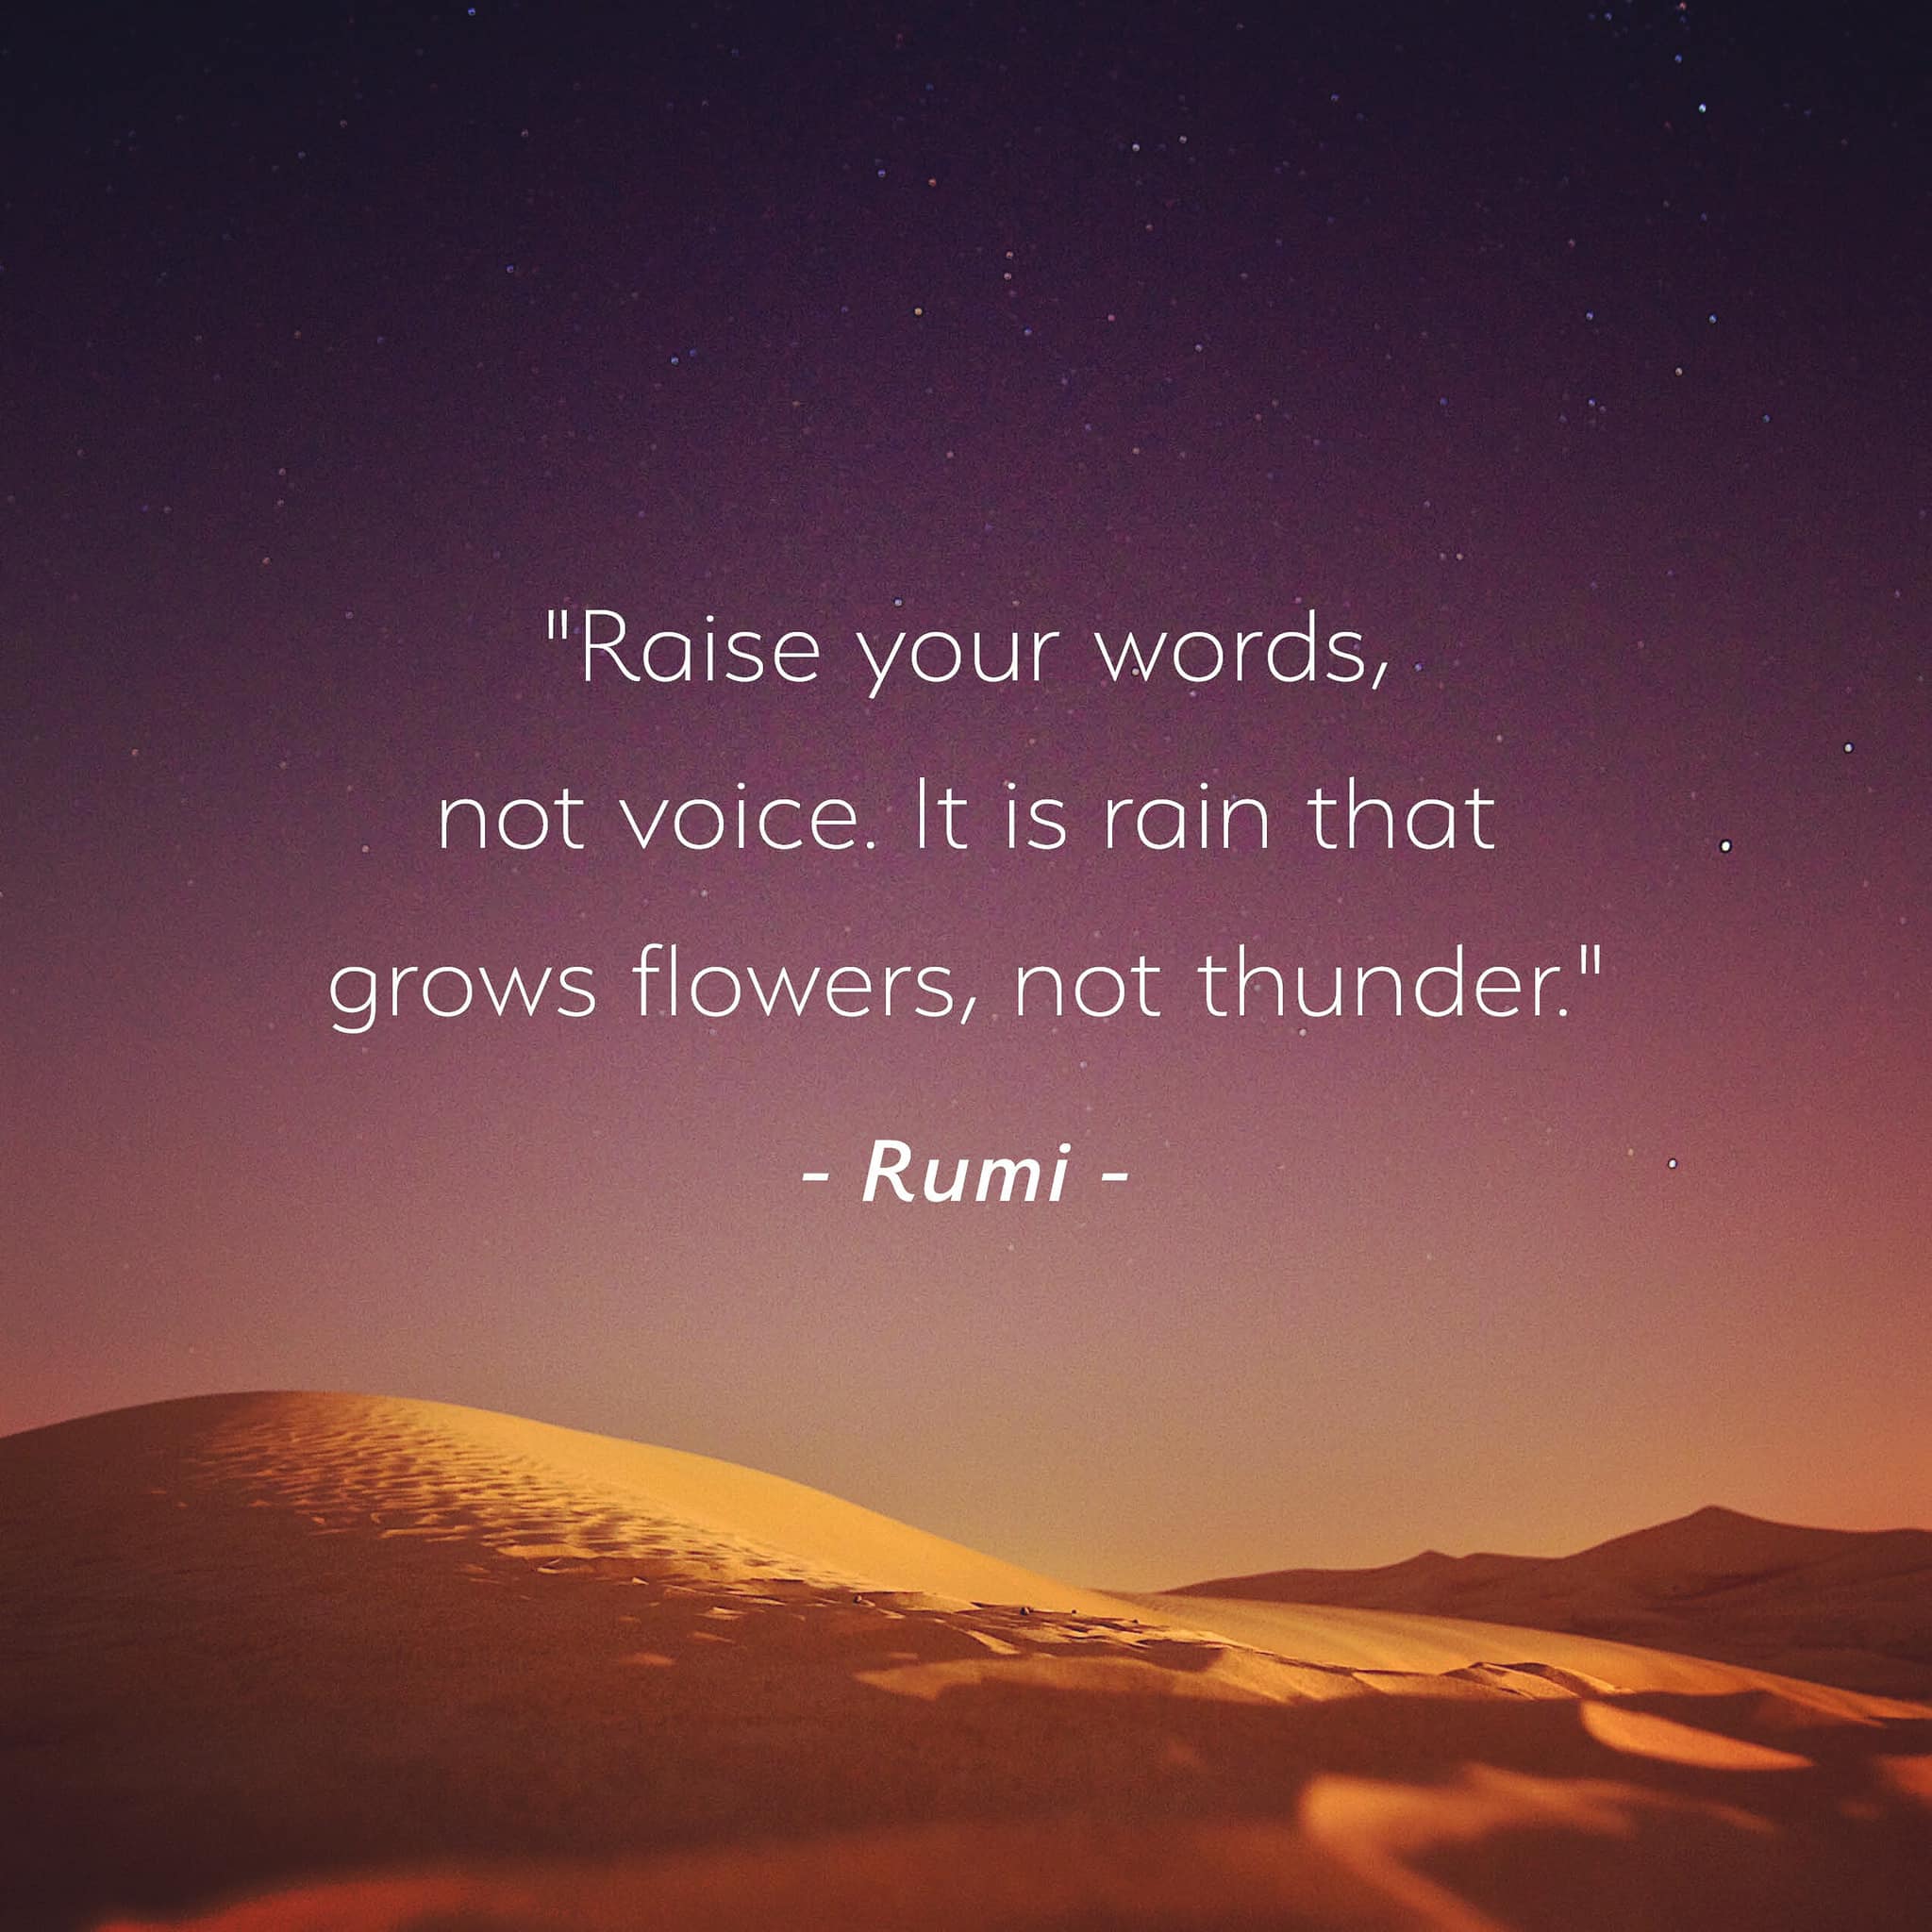 Raise your words, not your voice. It is rain that grows flowers, not thunder. – Rumi